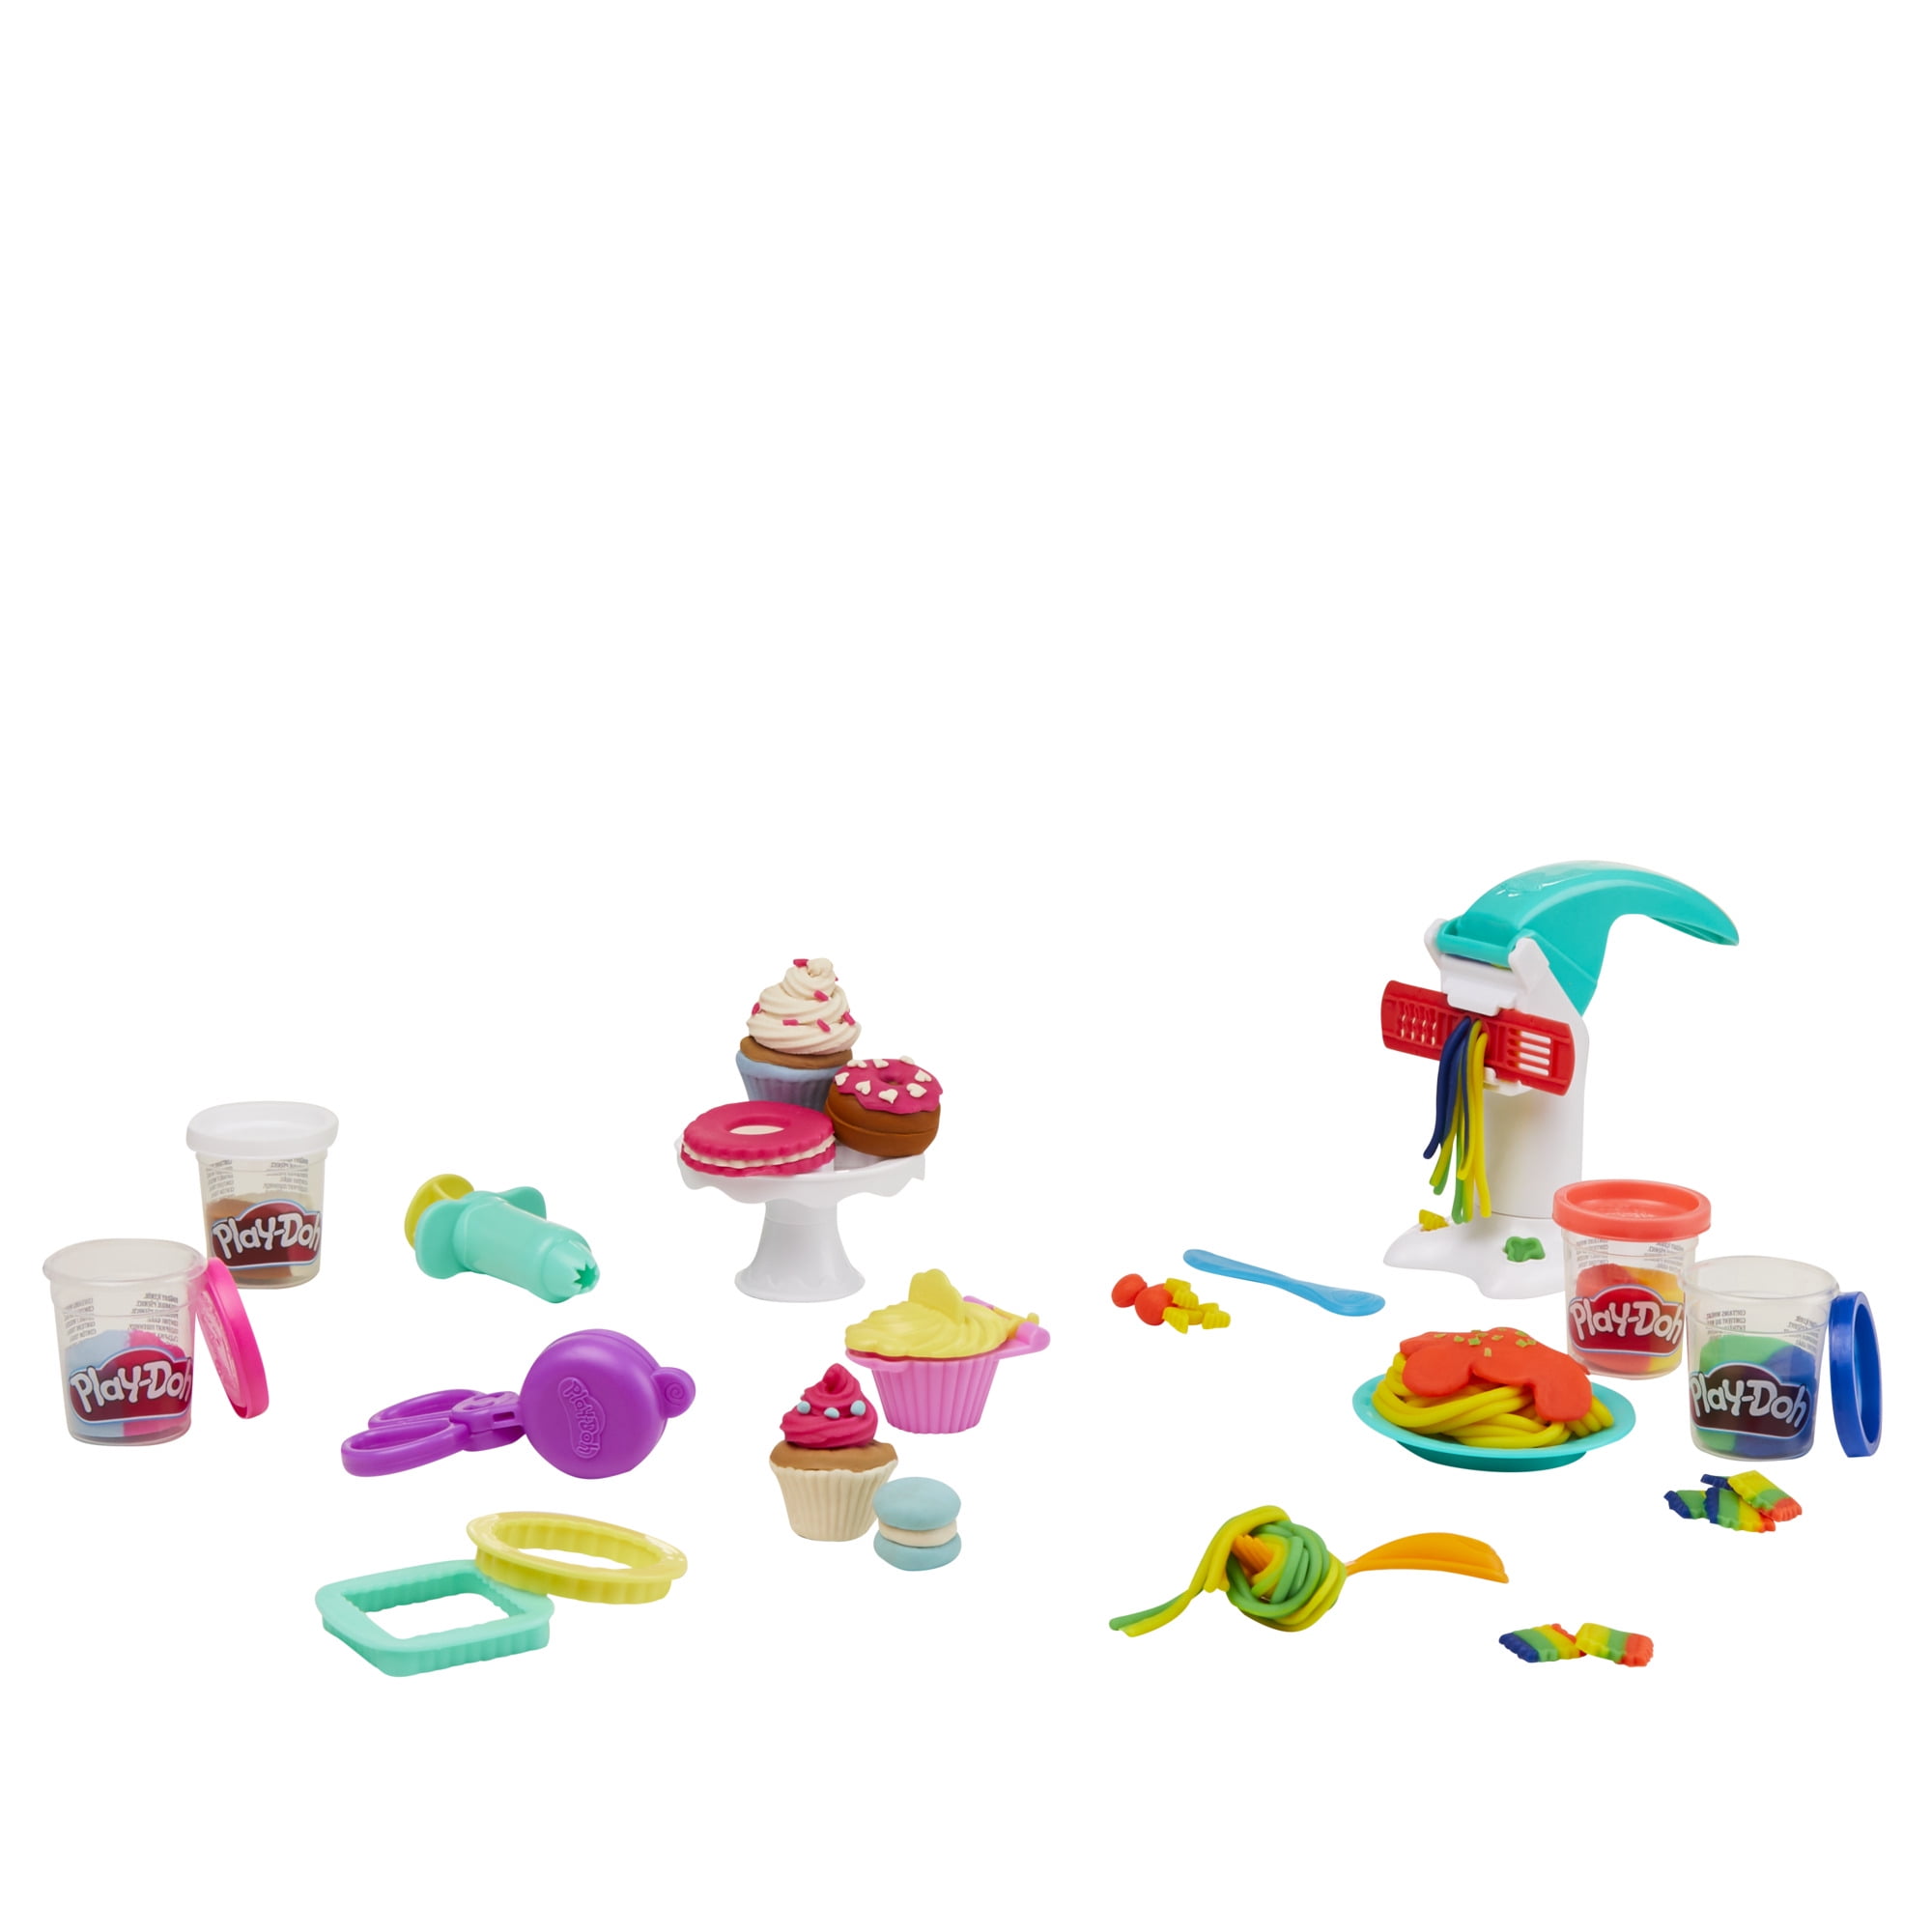 Neon Play-Doh Non-toxic Modeling Compound With 8 Colors Ships for sale online 